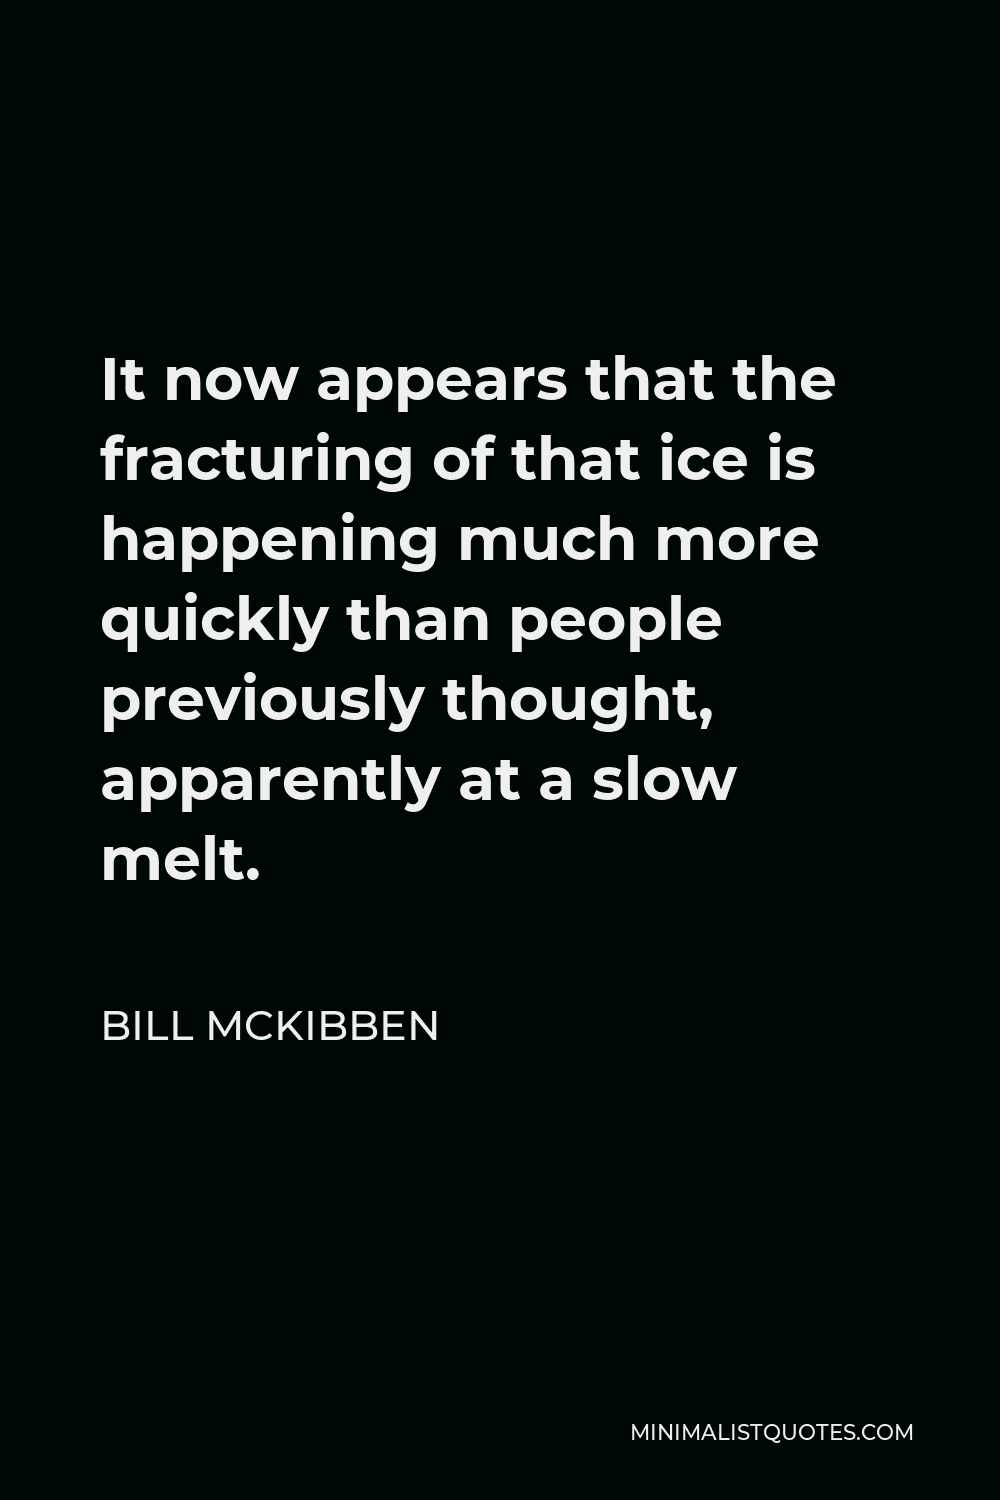 Bill McKibben Quote - It now appears that the fracturing of that ice is happening much more quickly than people previously thought, apparently at a slow melt.